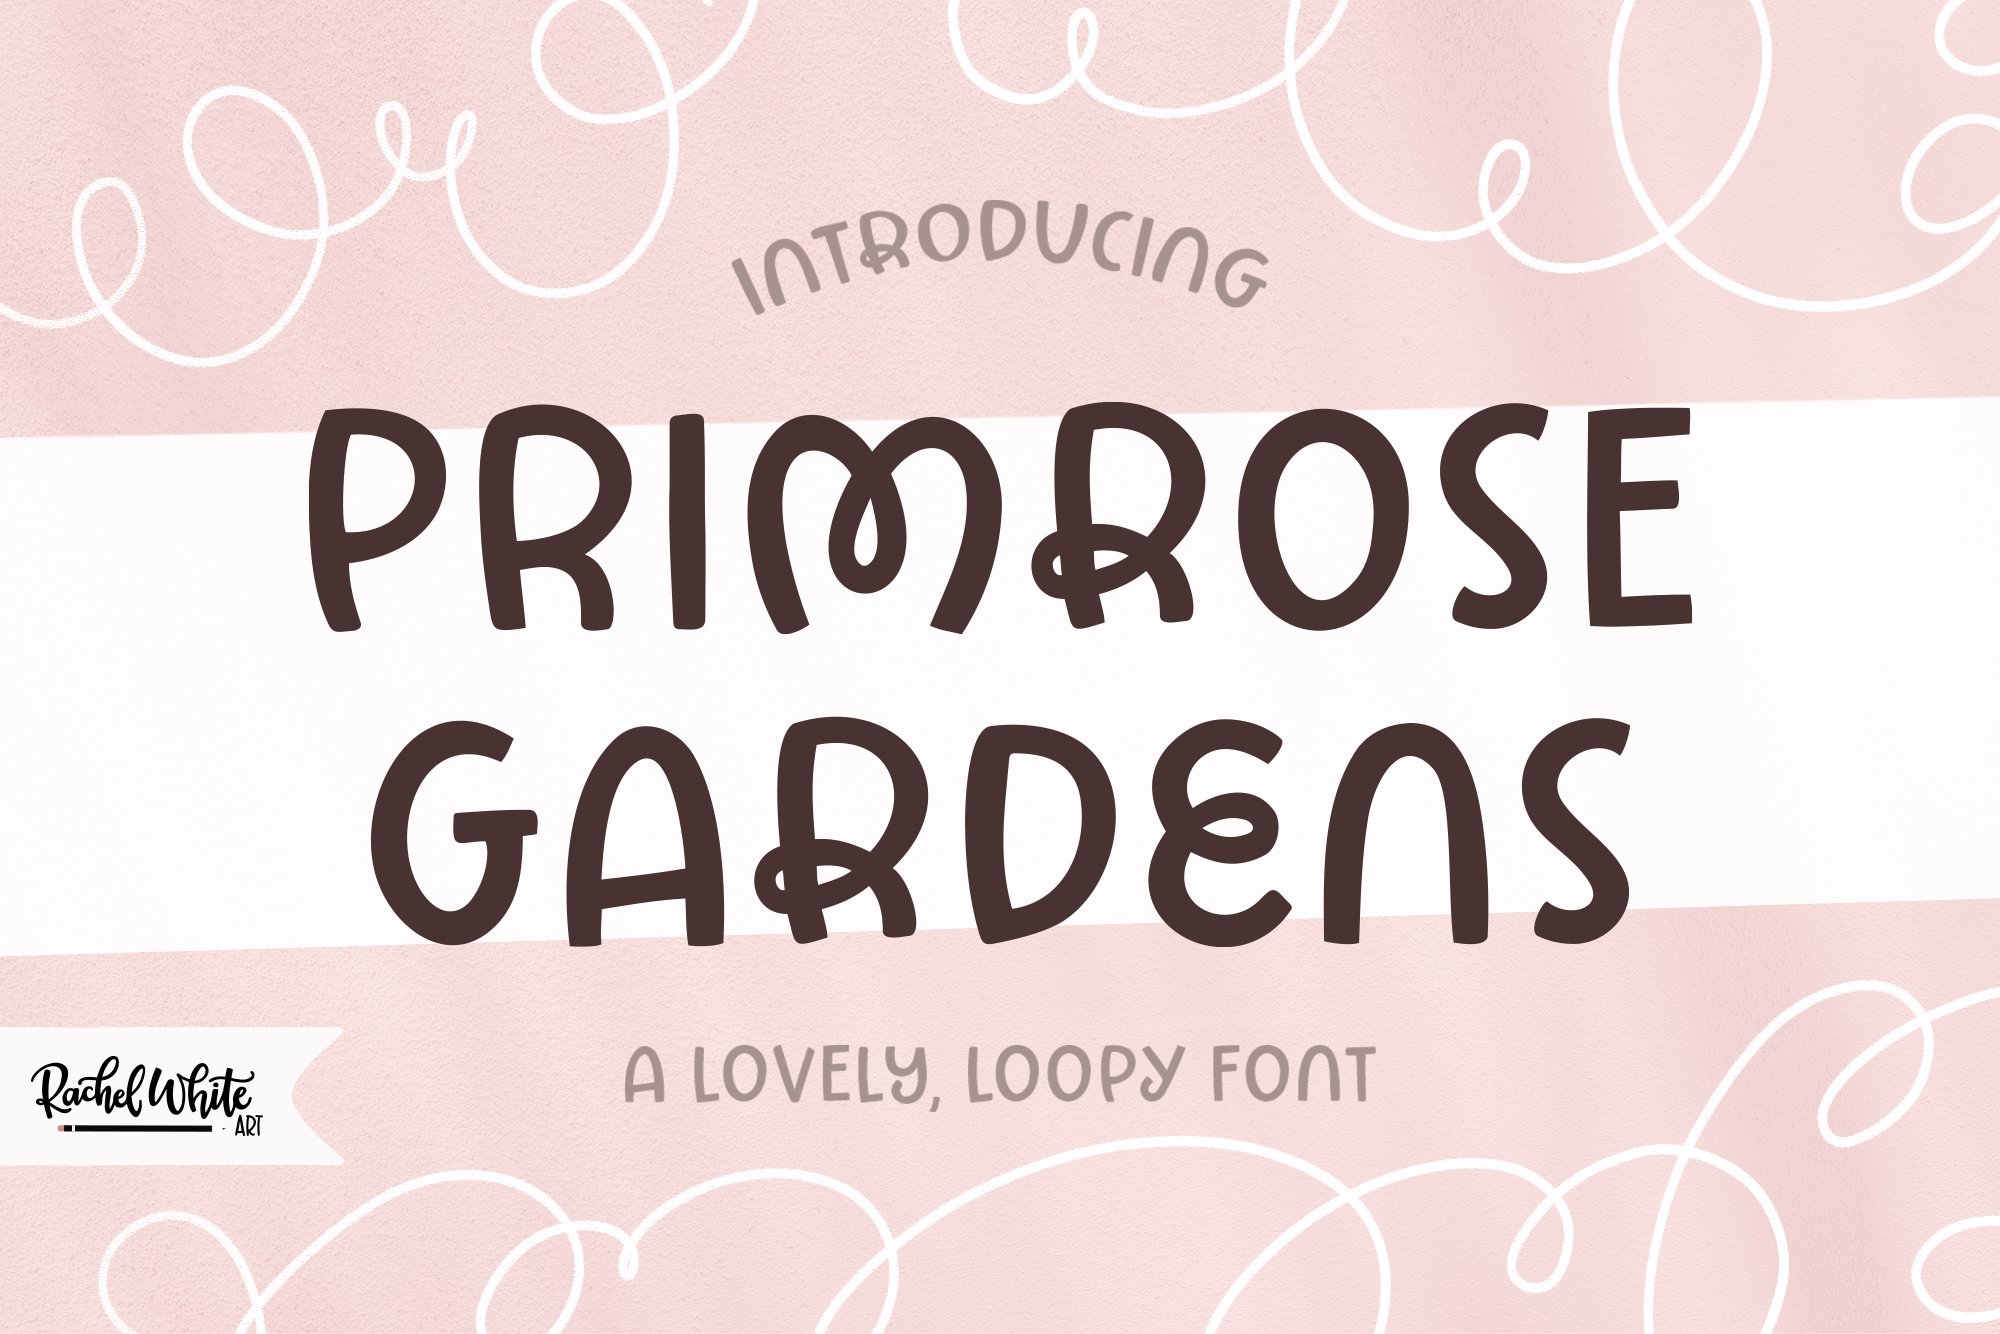 Primrose Gardens a lovely loopy font cover image.